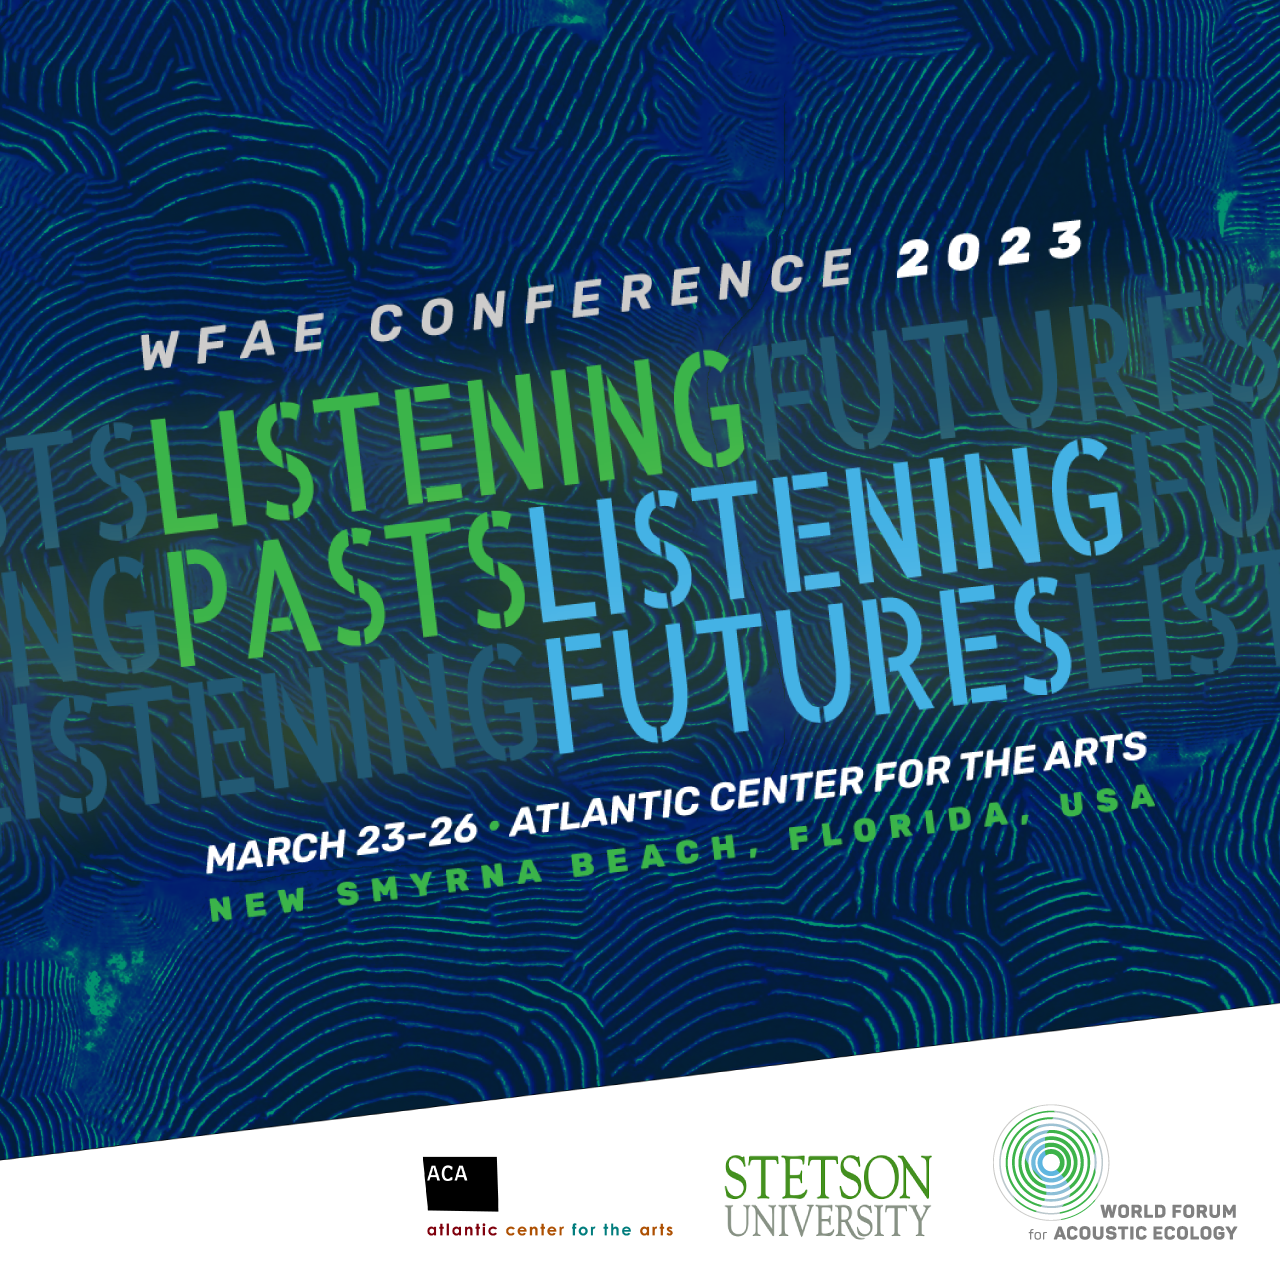 The conference logo.  Text sits on a blue agate background, reading 'WFAE Conference 2023 Listening Pasts Listening Futures, March 23-26, Atlantic Center for the Arts, New Smyrna Beach, Florida USA.  Logos for the Atlantic Center of the Arts, Stetson University and the World Forum for Acoustic Ecology are found below the text.